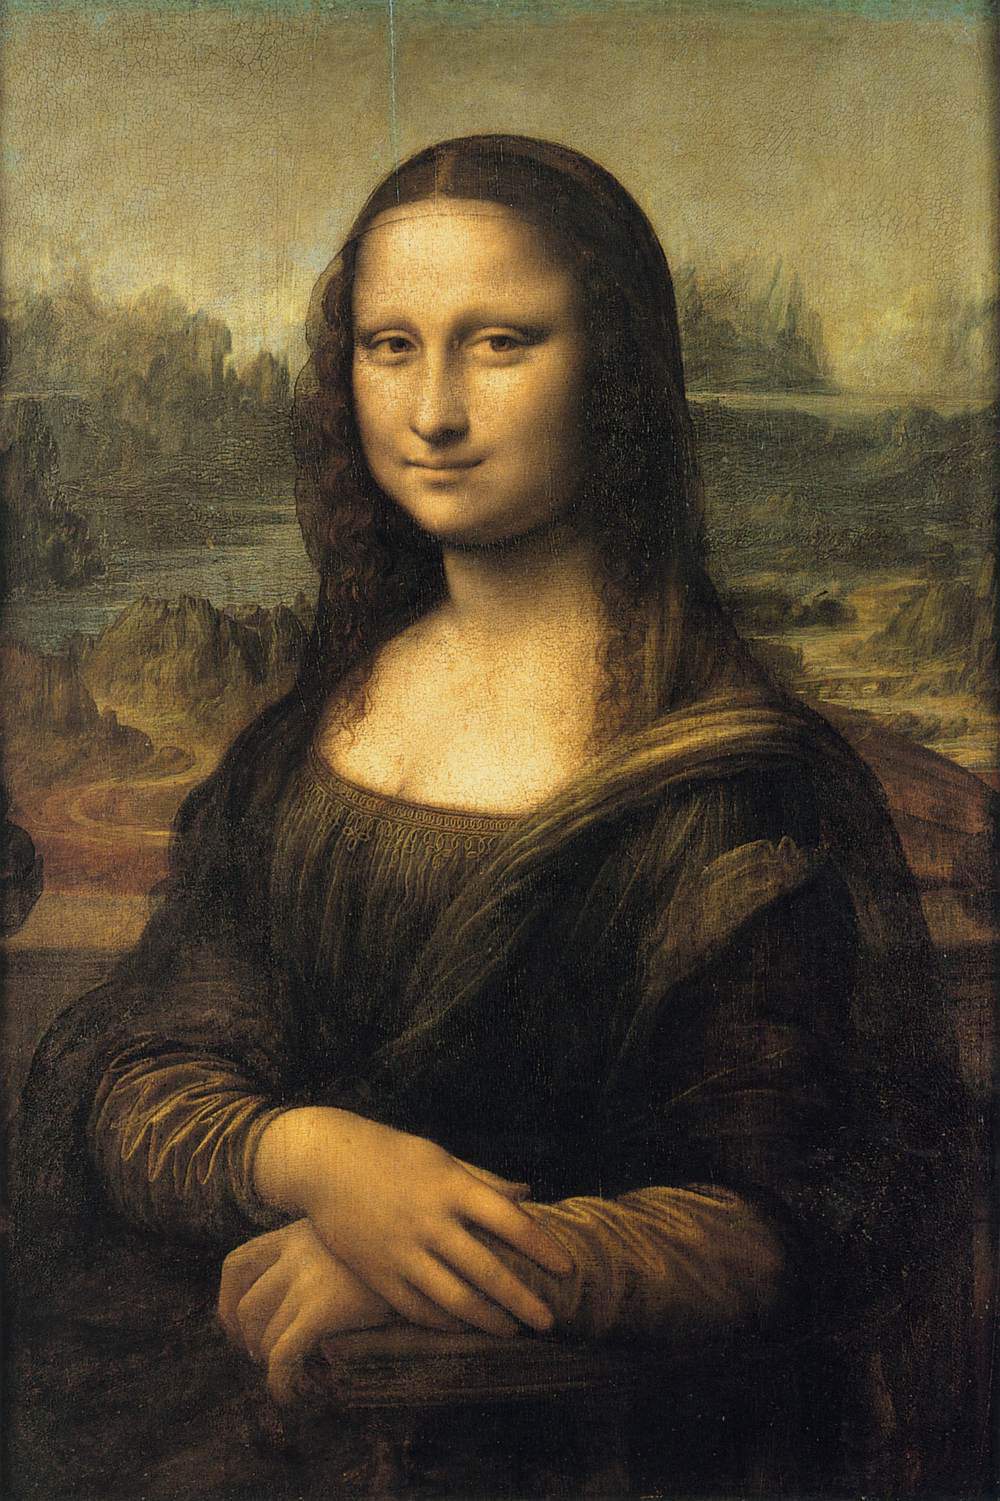 The Mona Lisa could travel from museum to museum